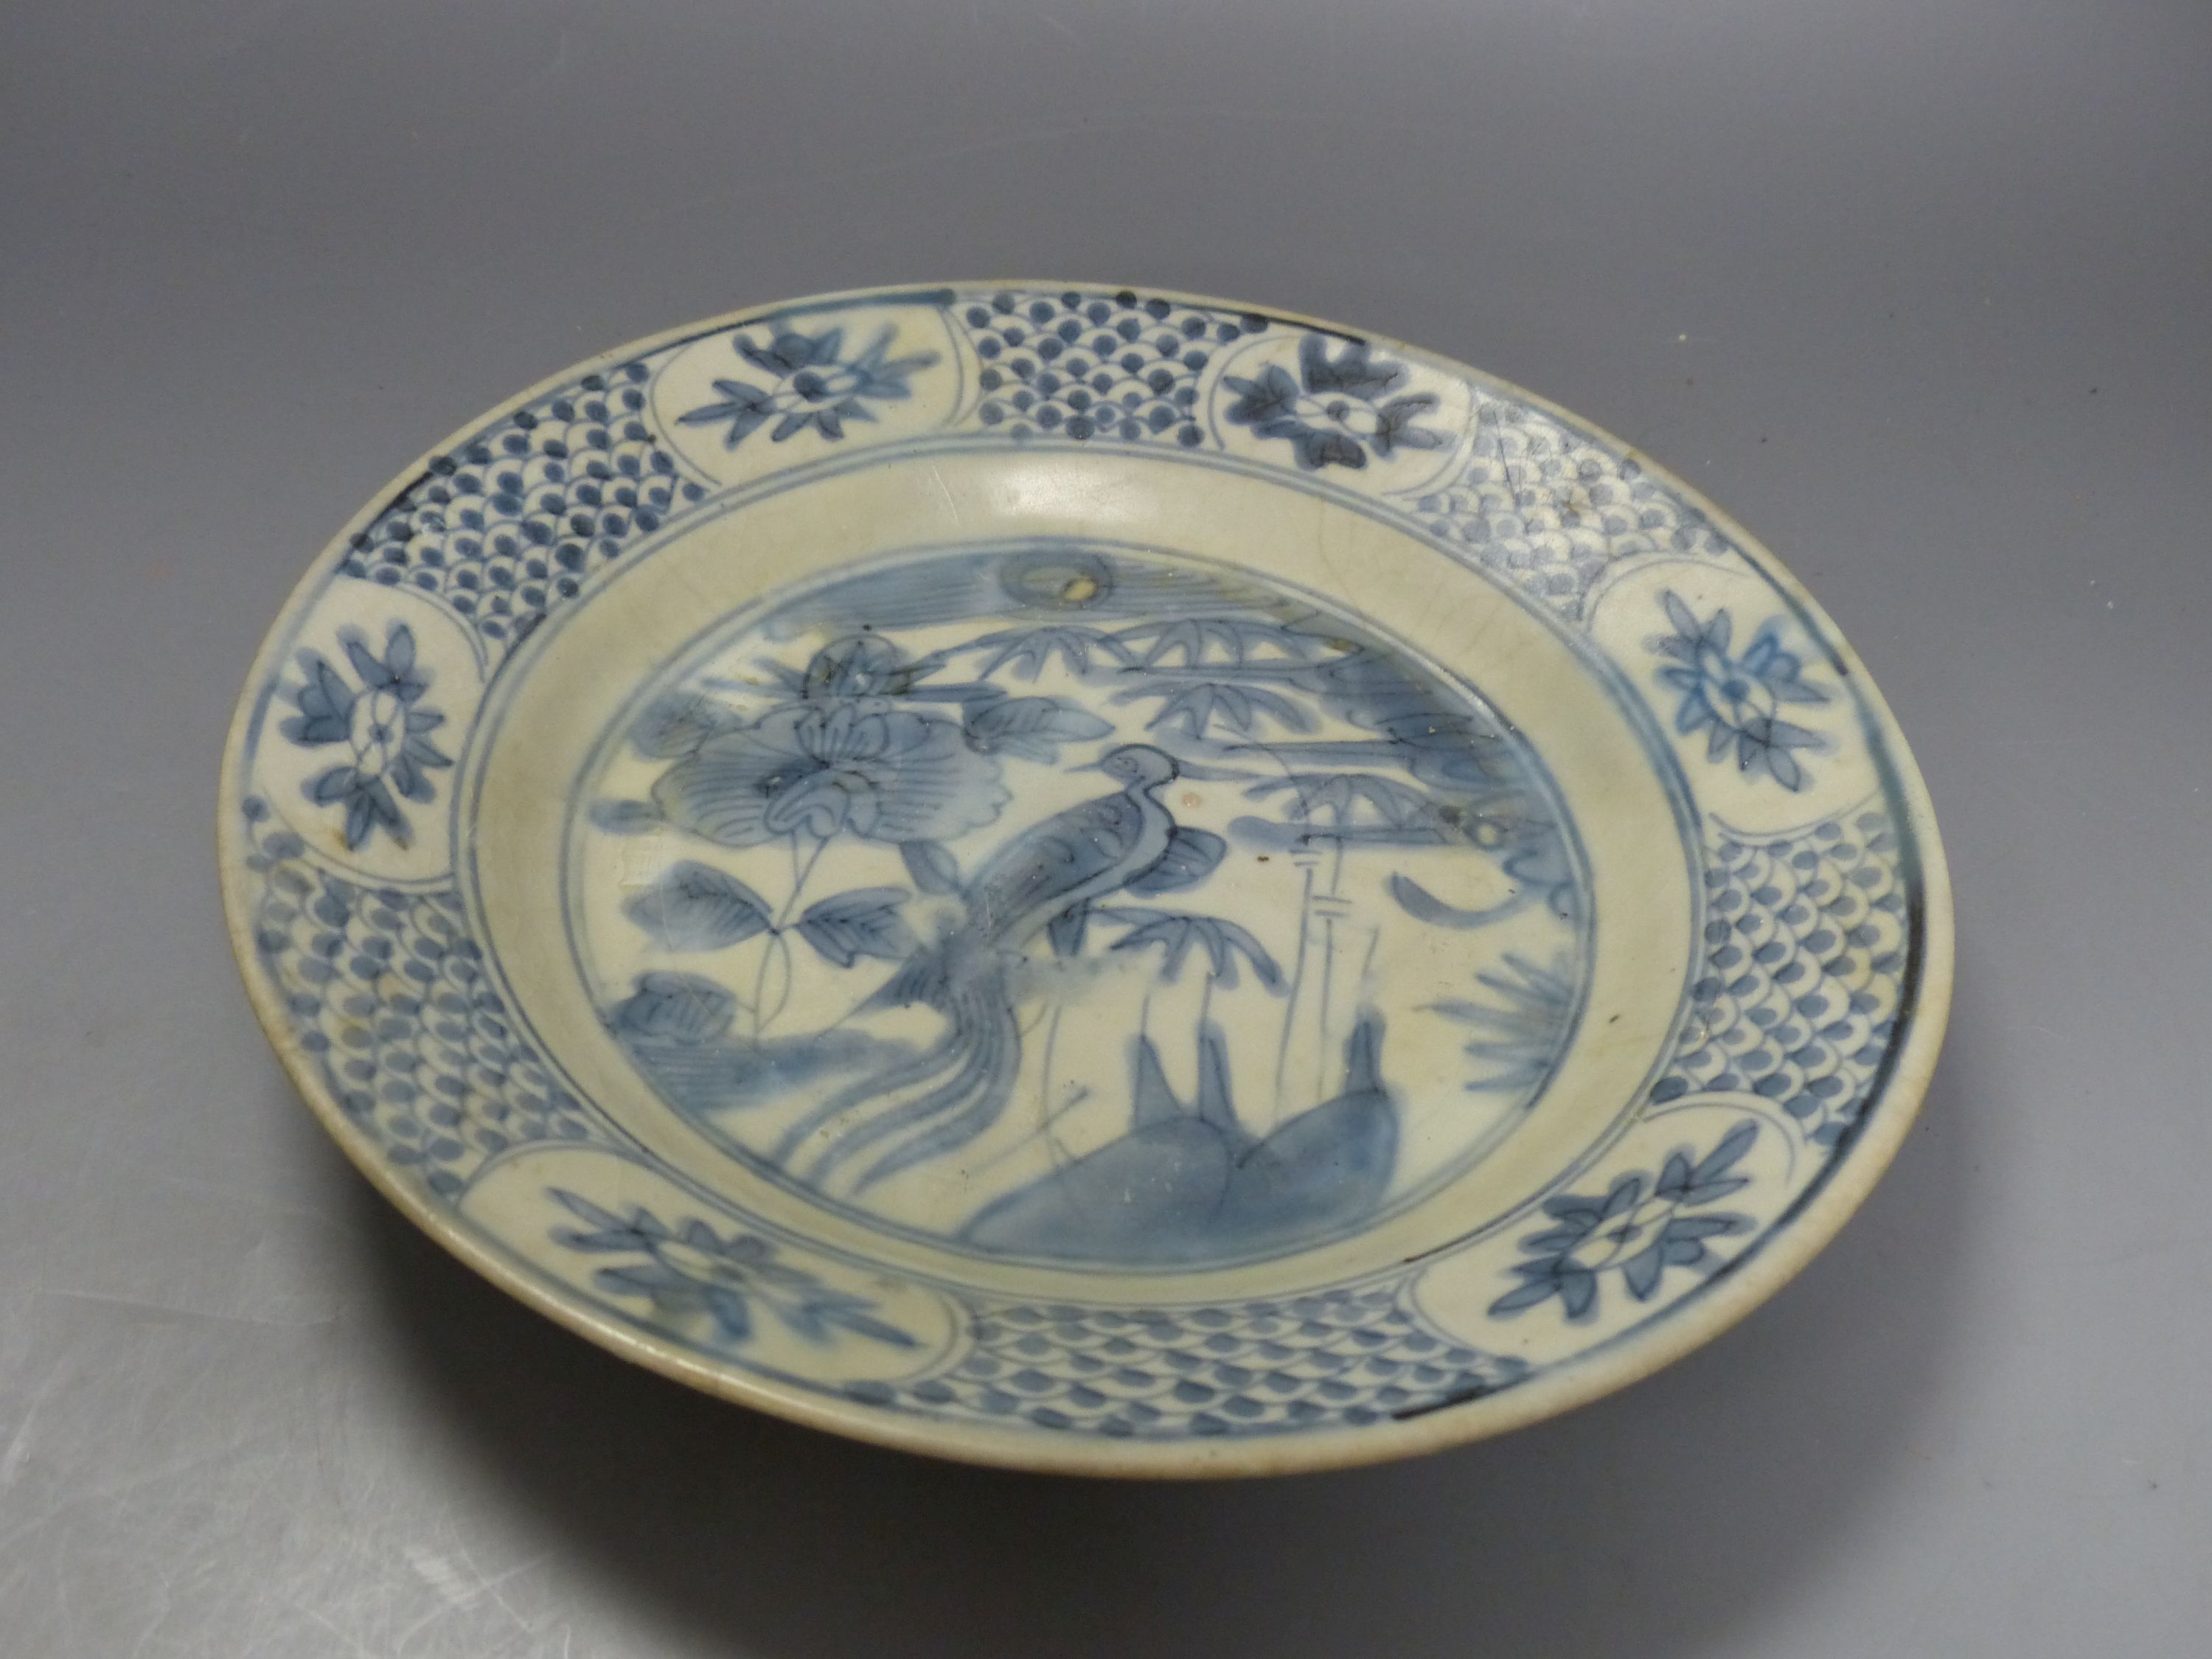 A Chinese Swatow ware blue and white dish, early 17th century, diameter 26cm